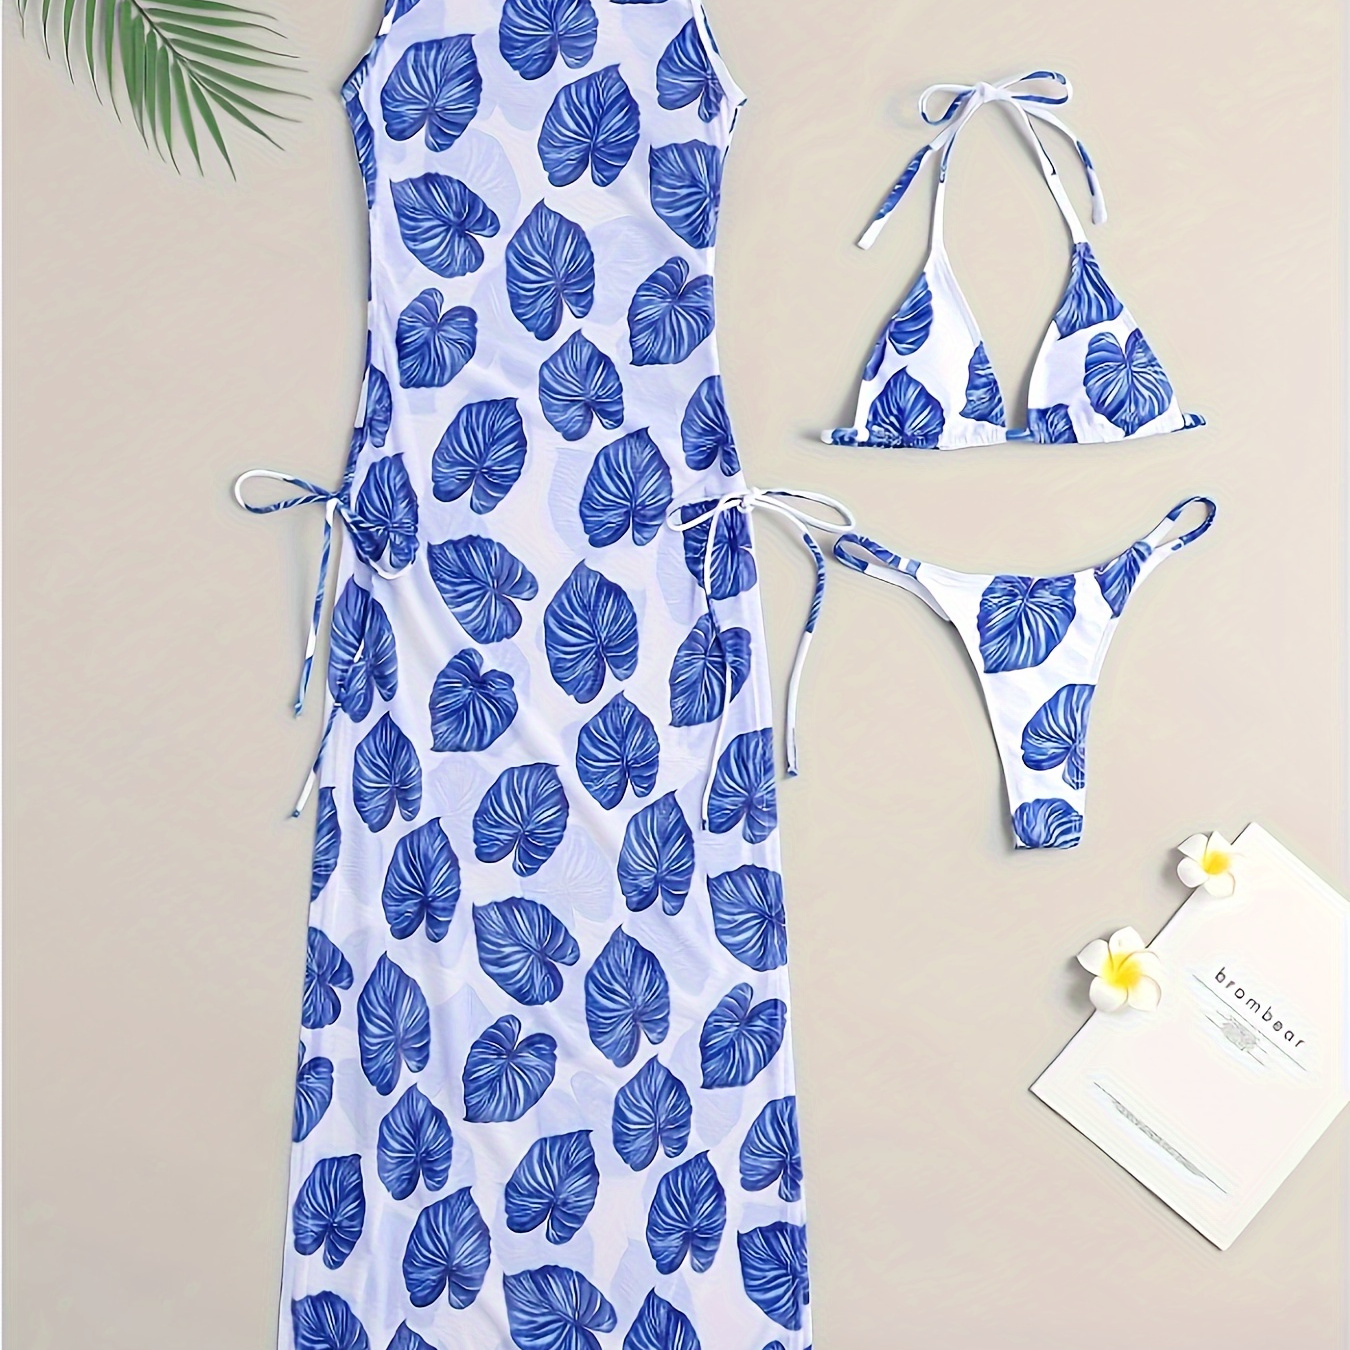 

Leaf Print 3 Piece Set Bikini, Halter V Neck High Cut With Round Neck Tie Side Cover Up Dress Swimsuits, Women's Swimwear & Clothing Triangle Top